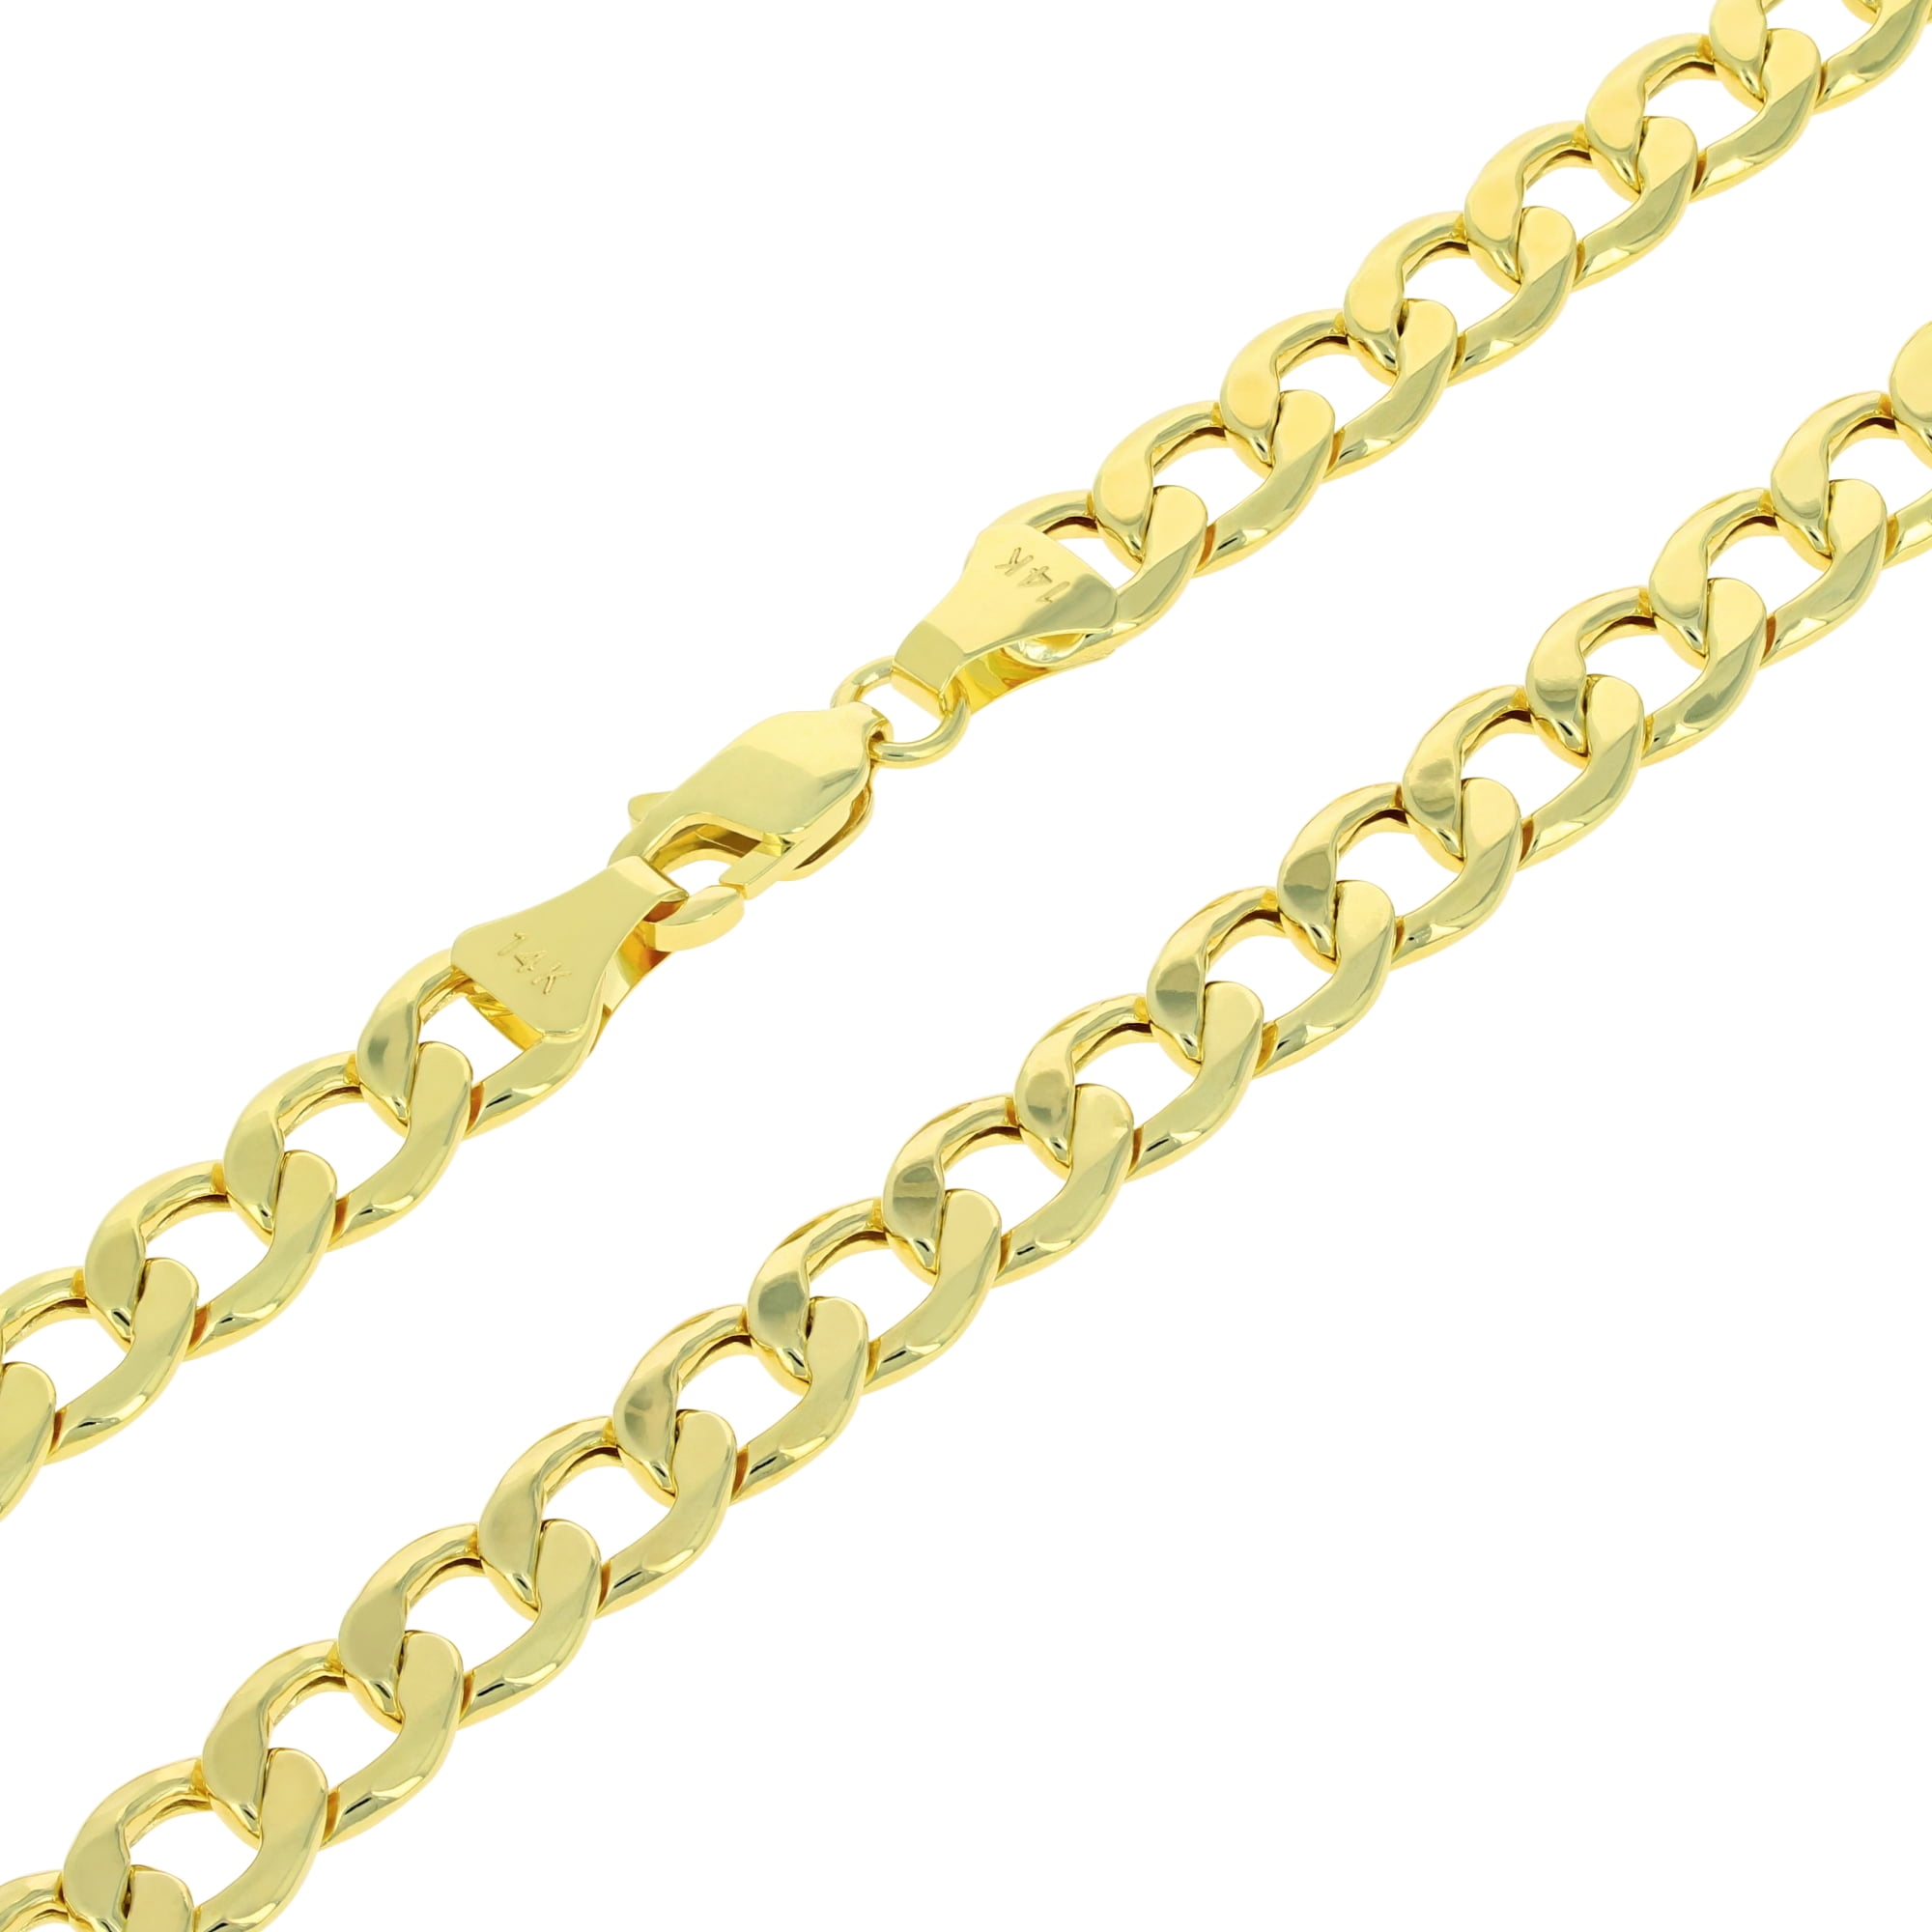 Nuragold 14k Yellow Gold 6.5mm Cuban Curb Link Chain Pendant Necklace ...